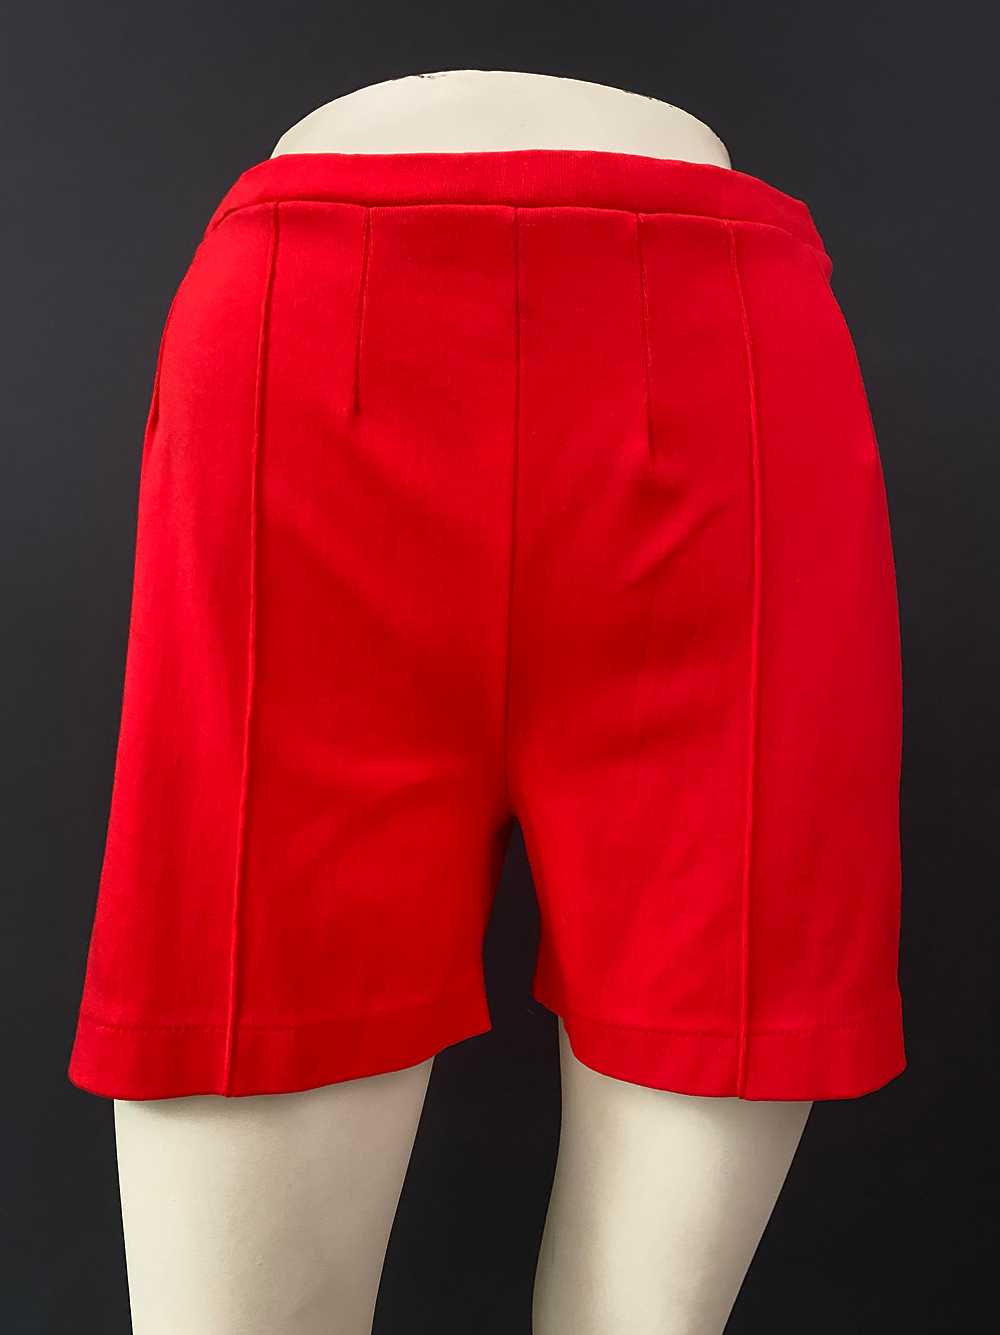 60s/70s Red Mod Pull On Shorts - image 1